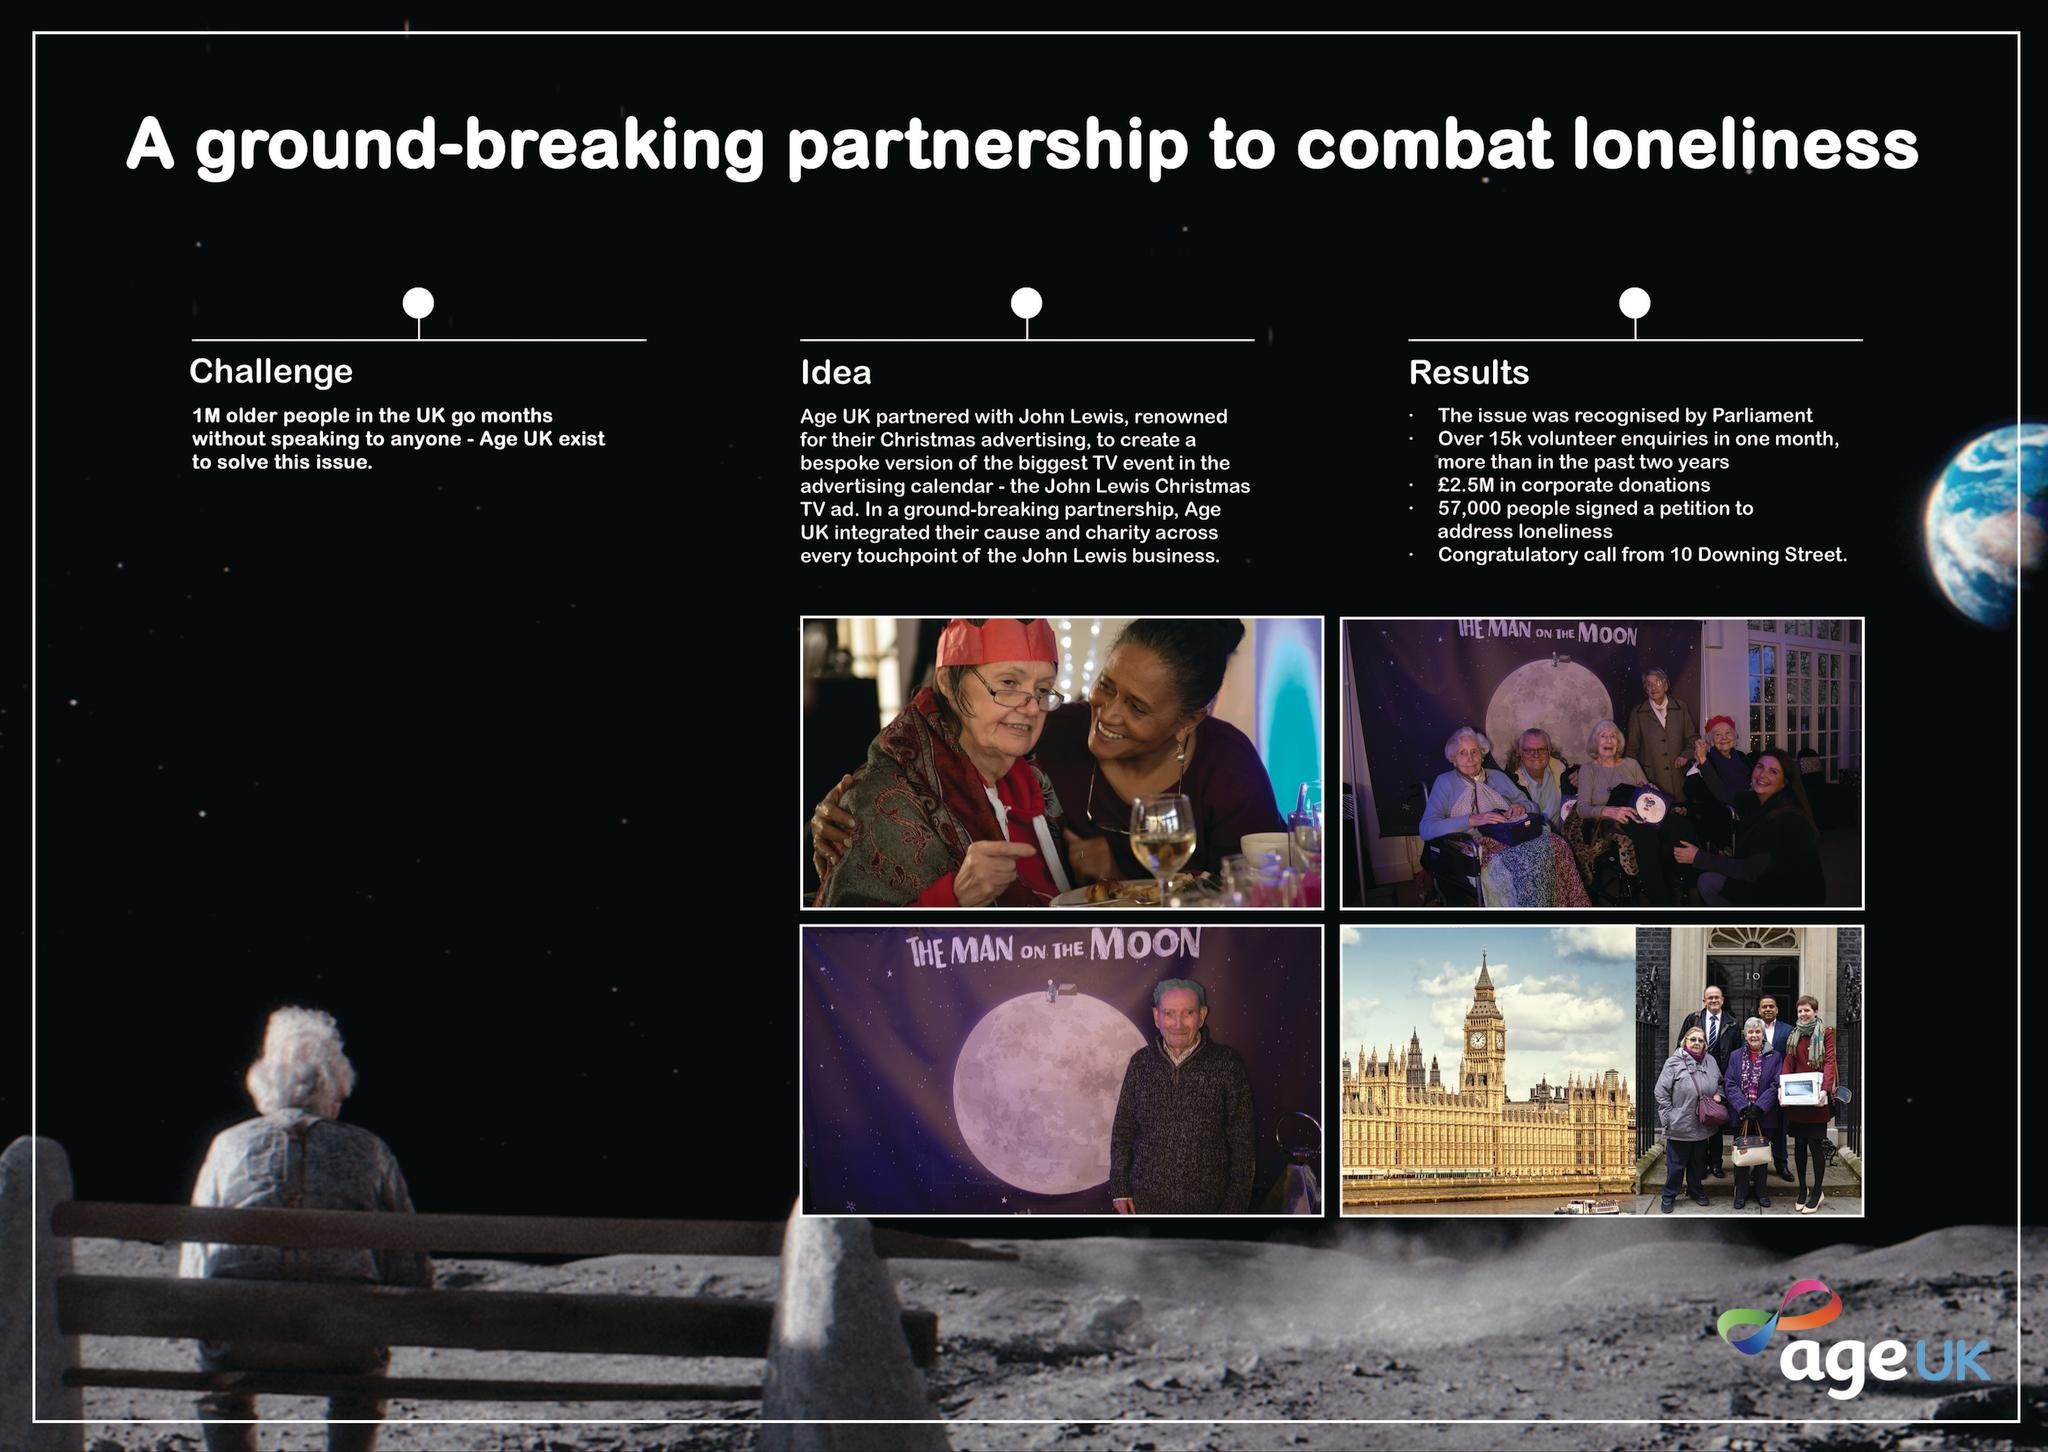 A ground-breaking partnership to combat loneliness.